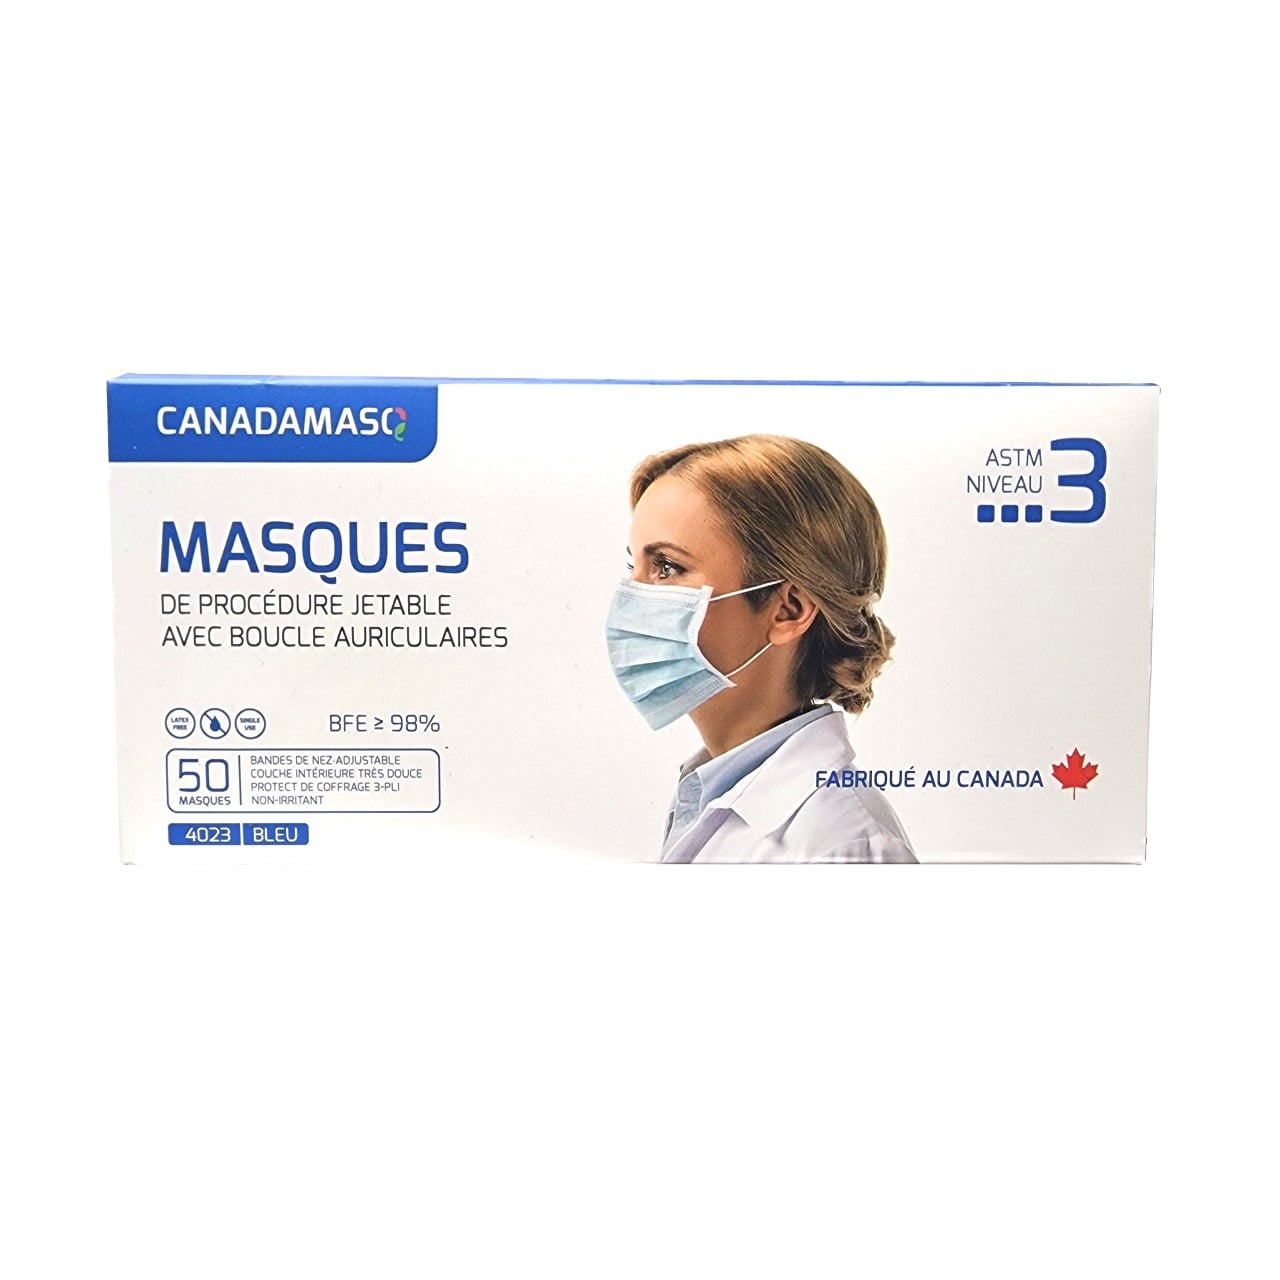 Product label for Copy of CANADAMASQ Disposable Medical Masks (ASTM Level 3) Blue (50 count) in French